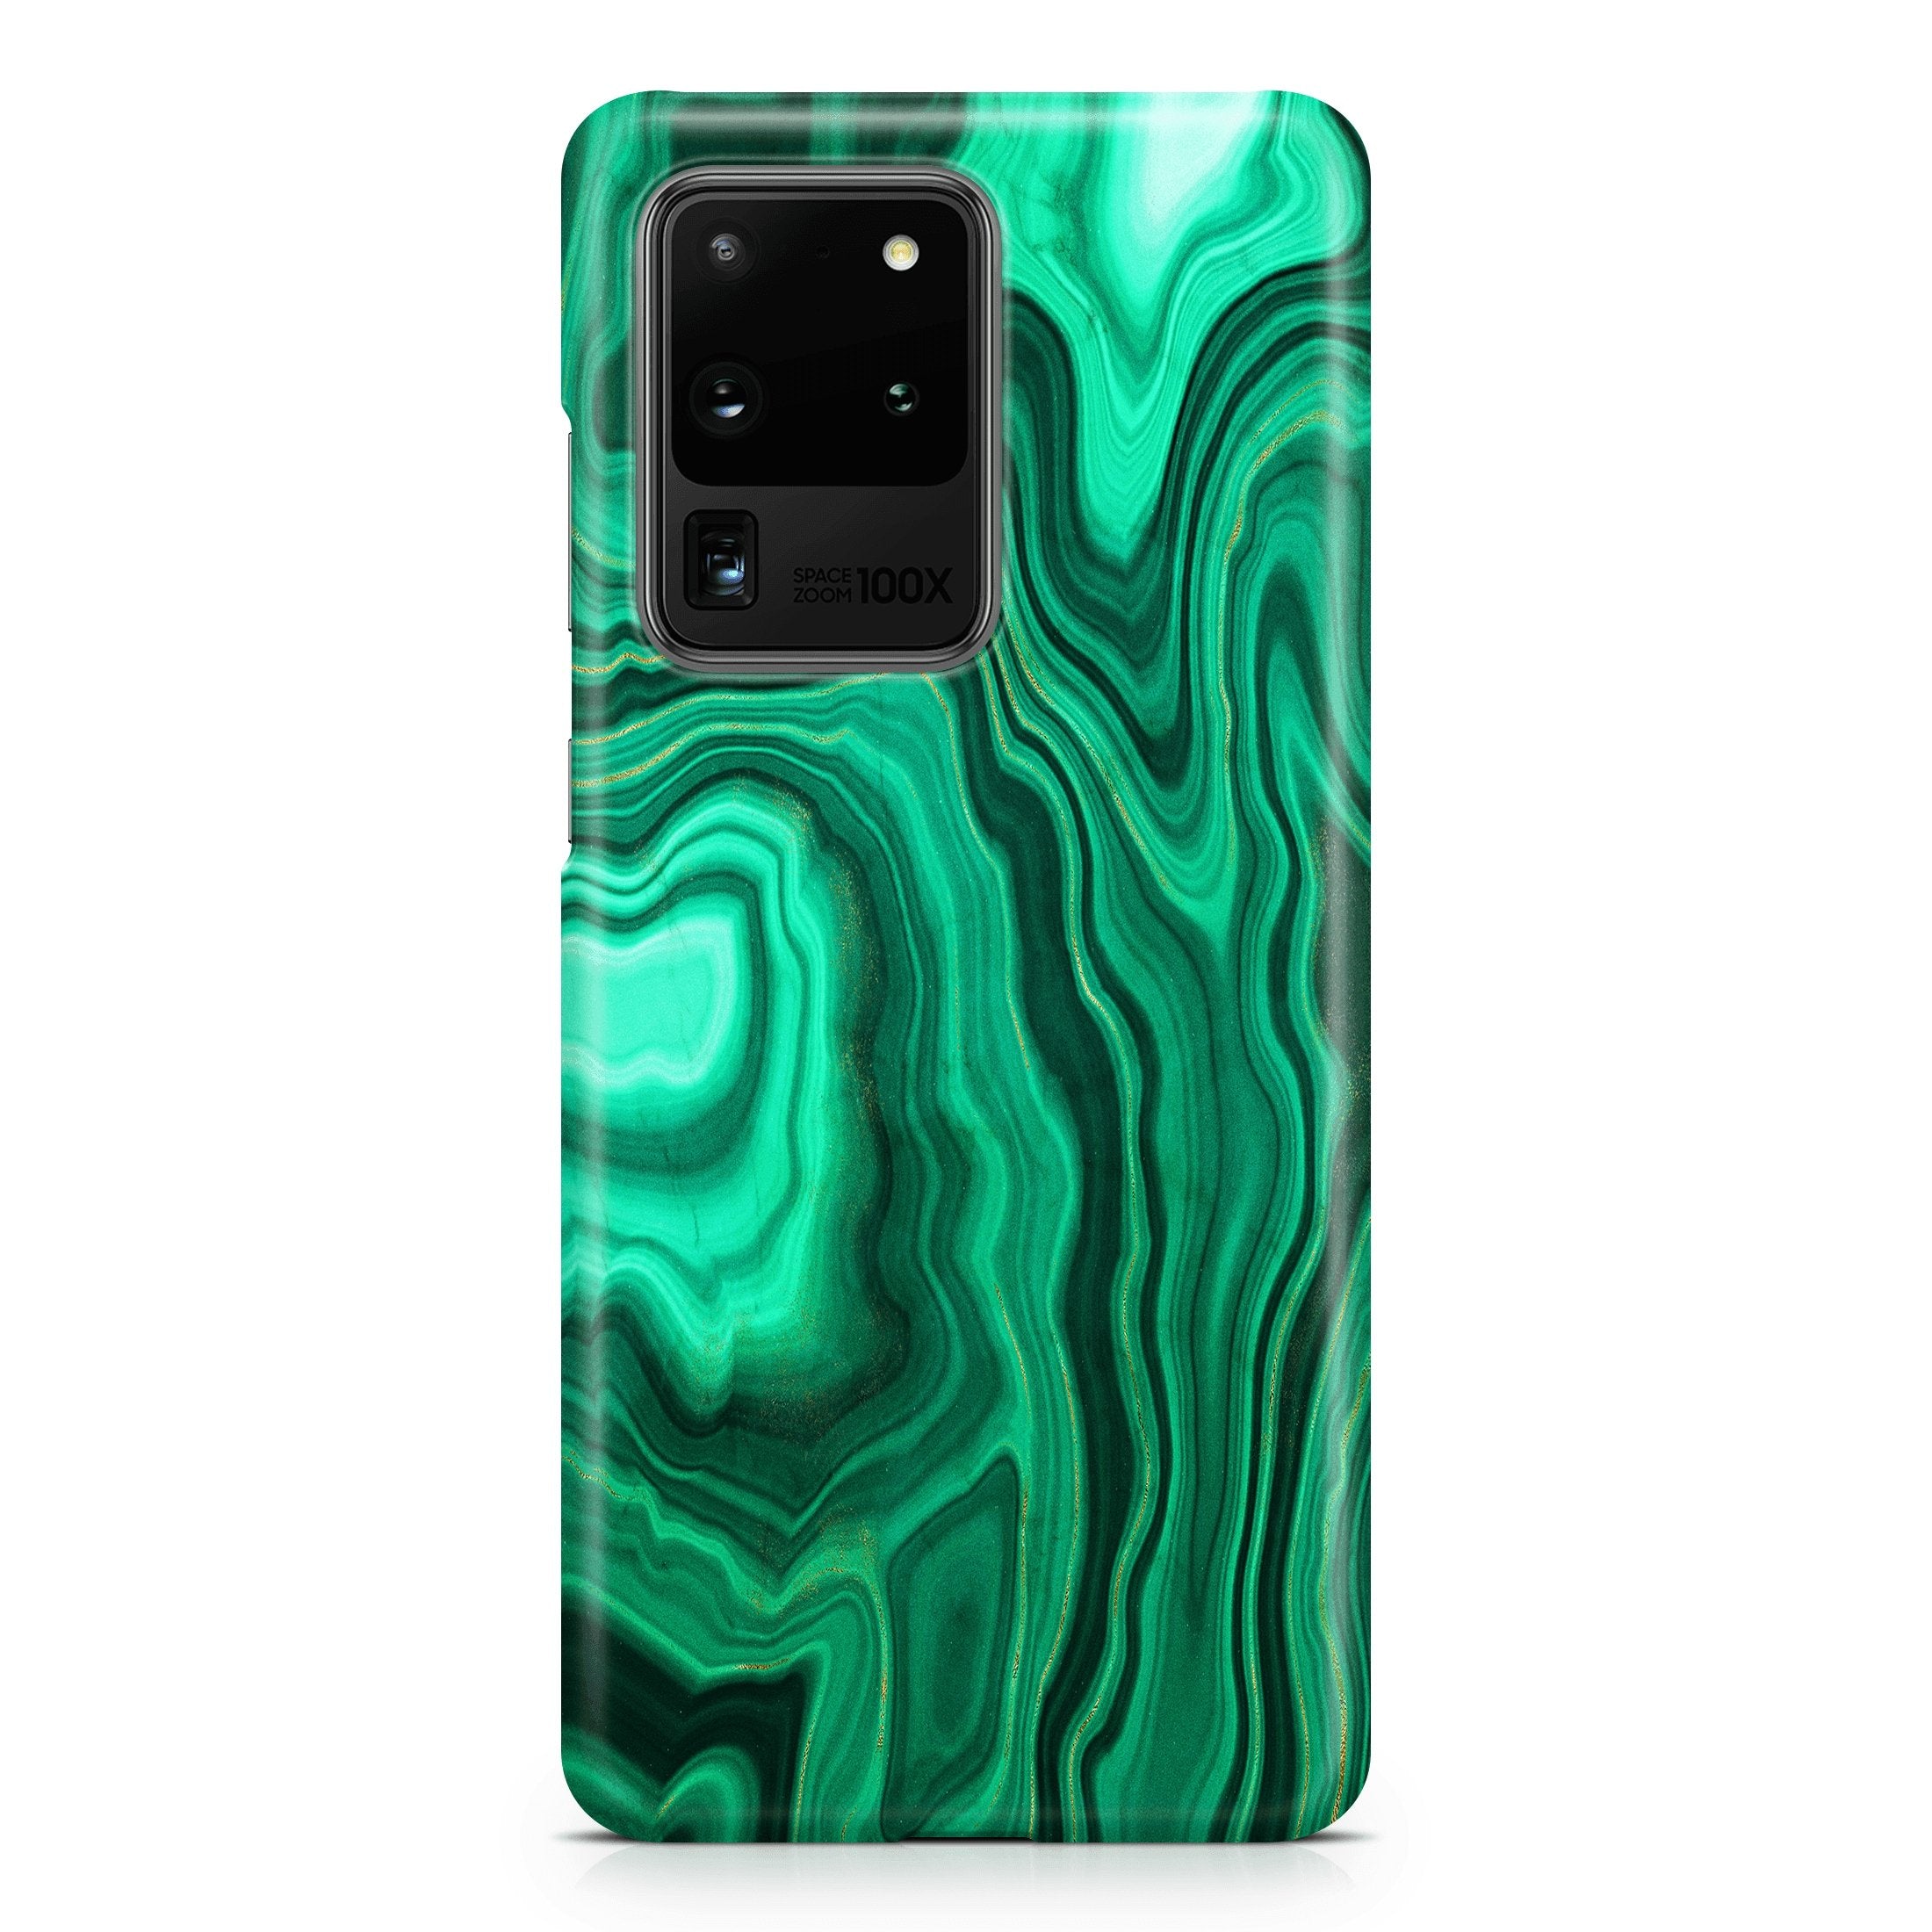 Malachite I - Samsung phone case designs by CaseSwagger